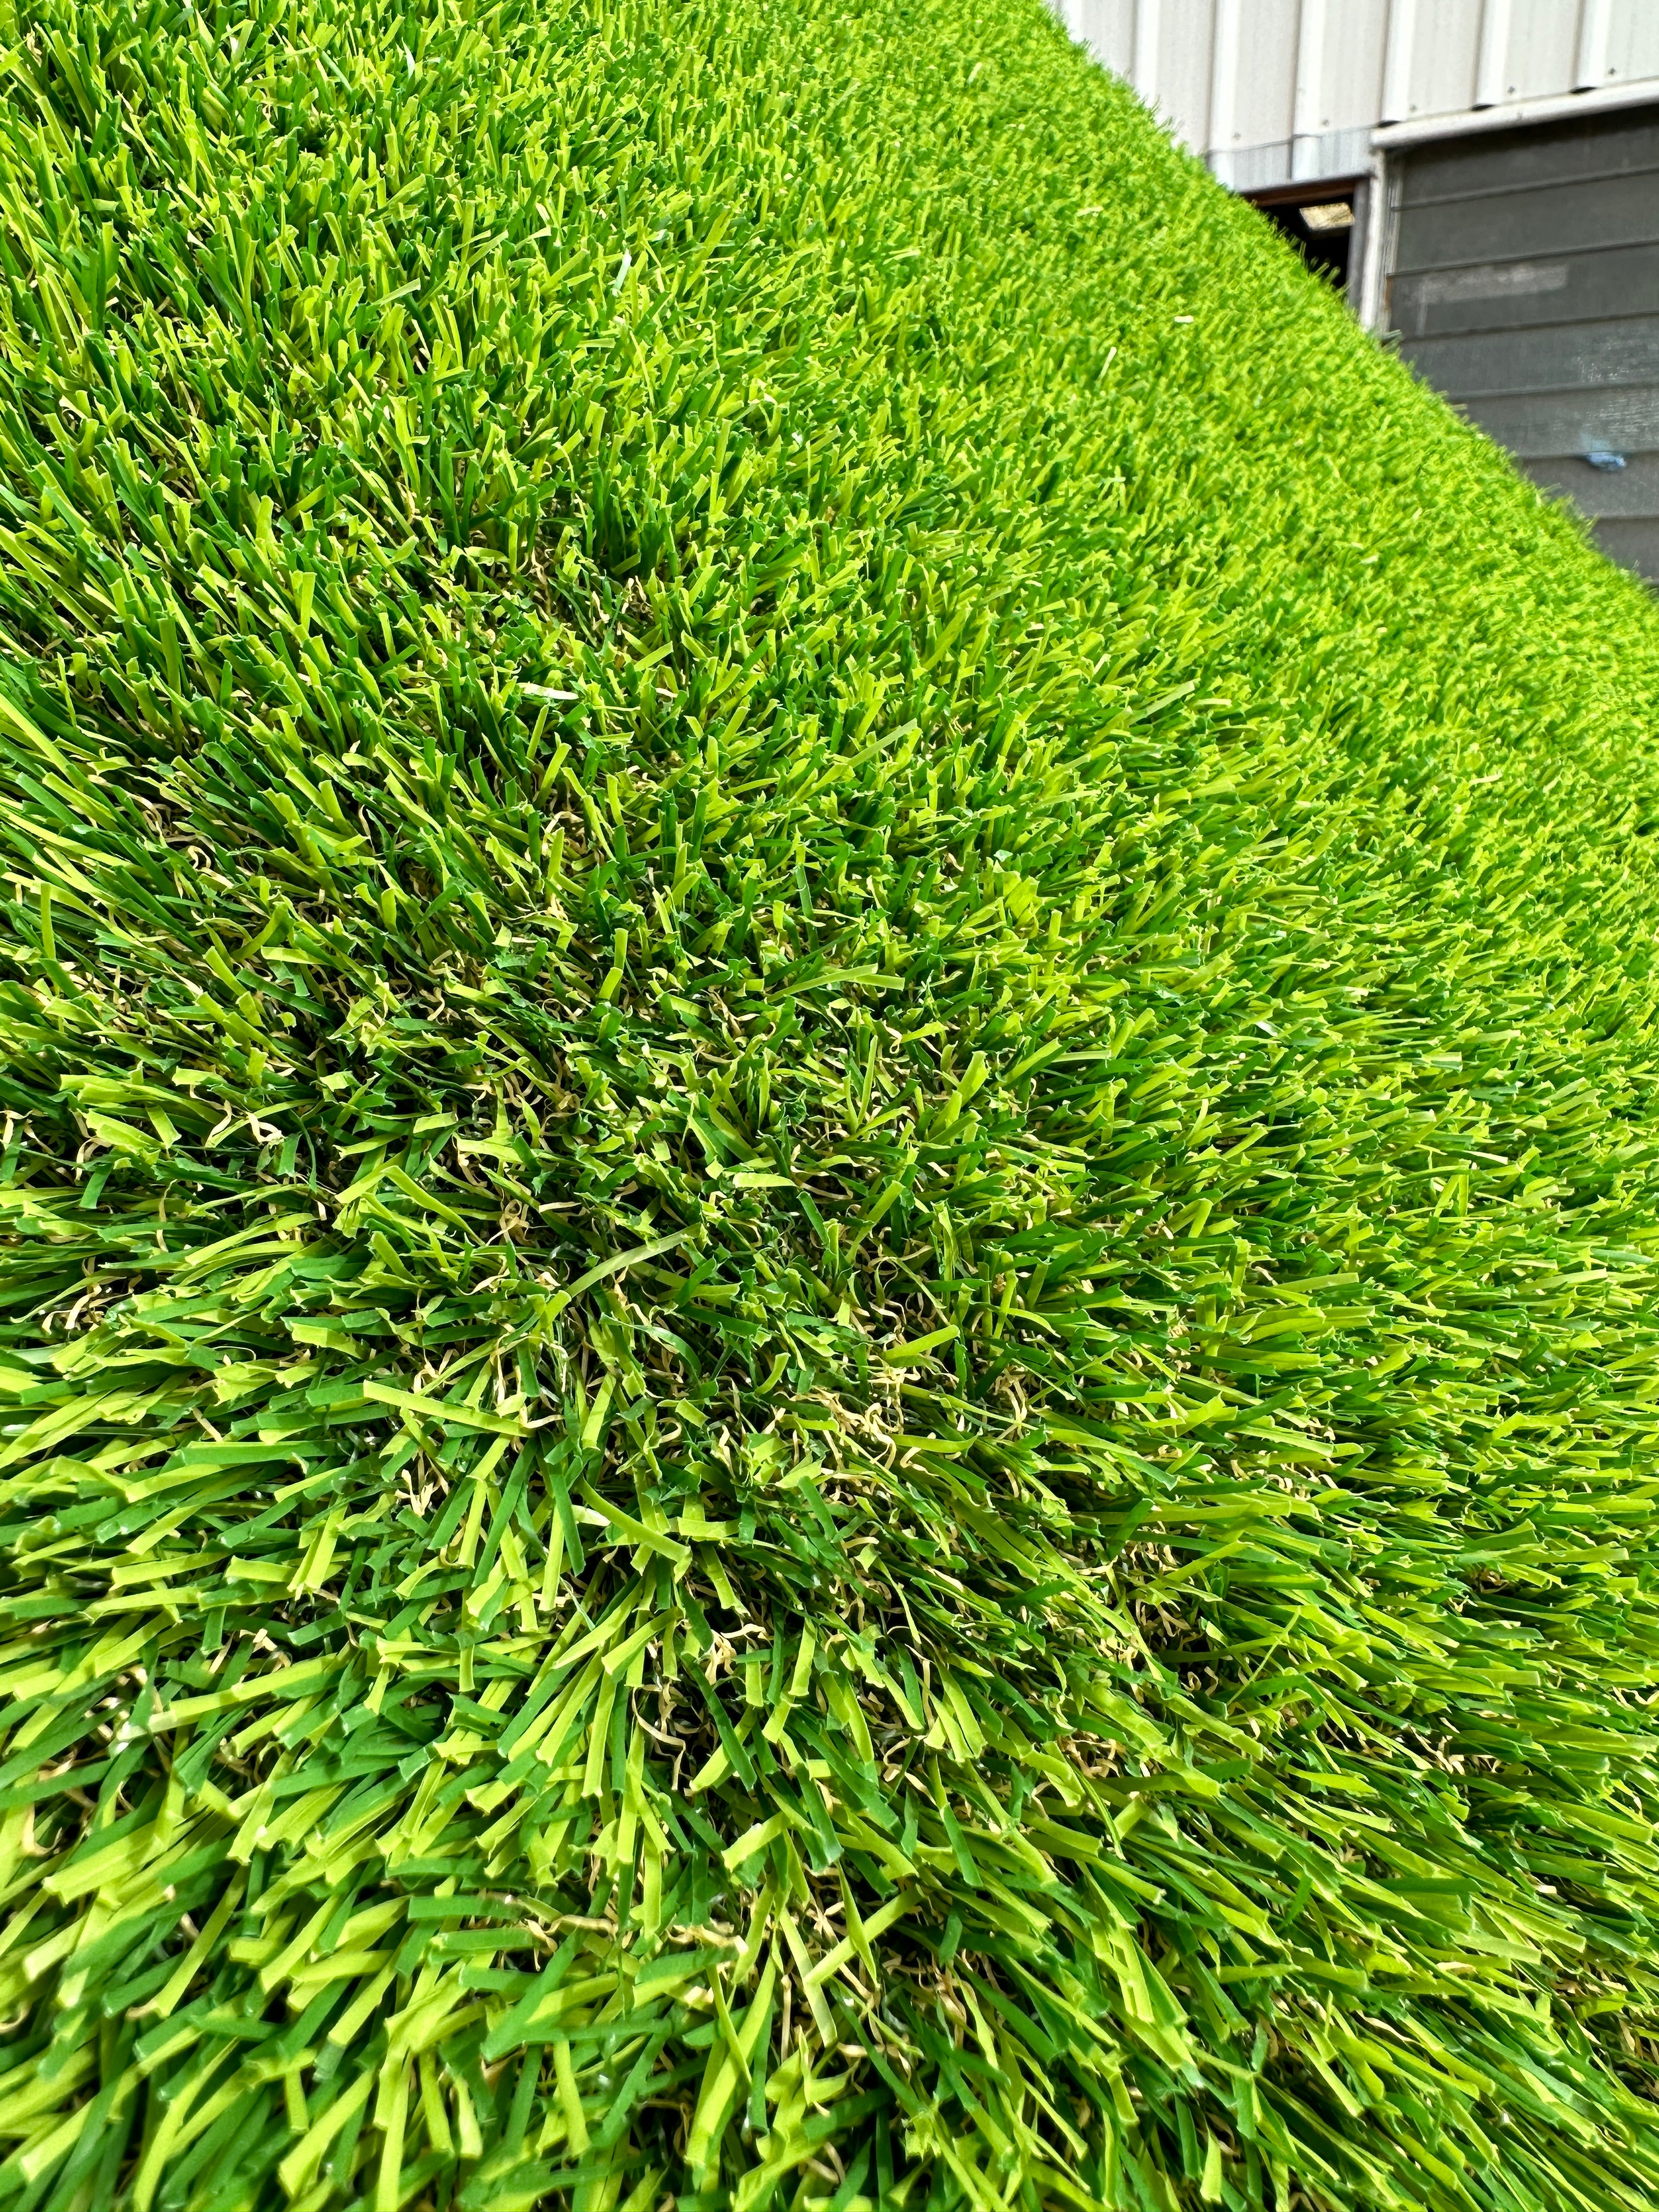 Artificial Grass Synthetic Turf - Pineapple Express